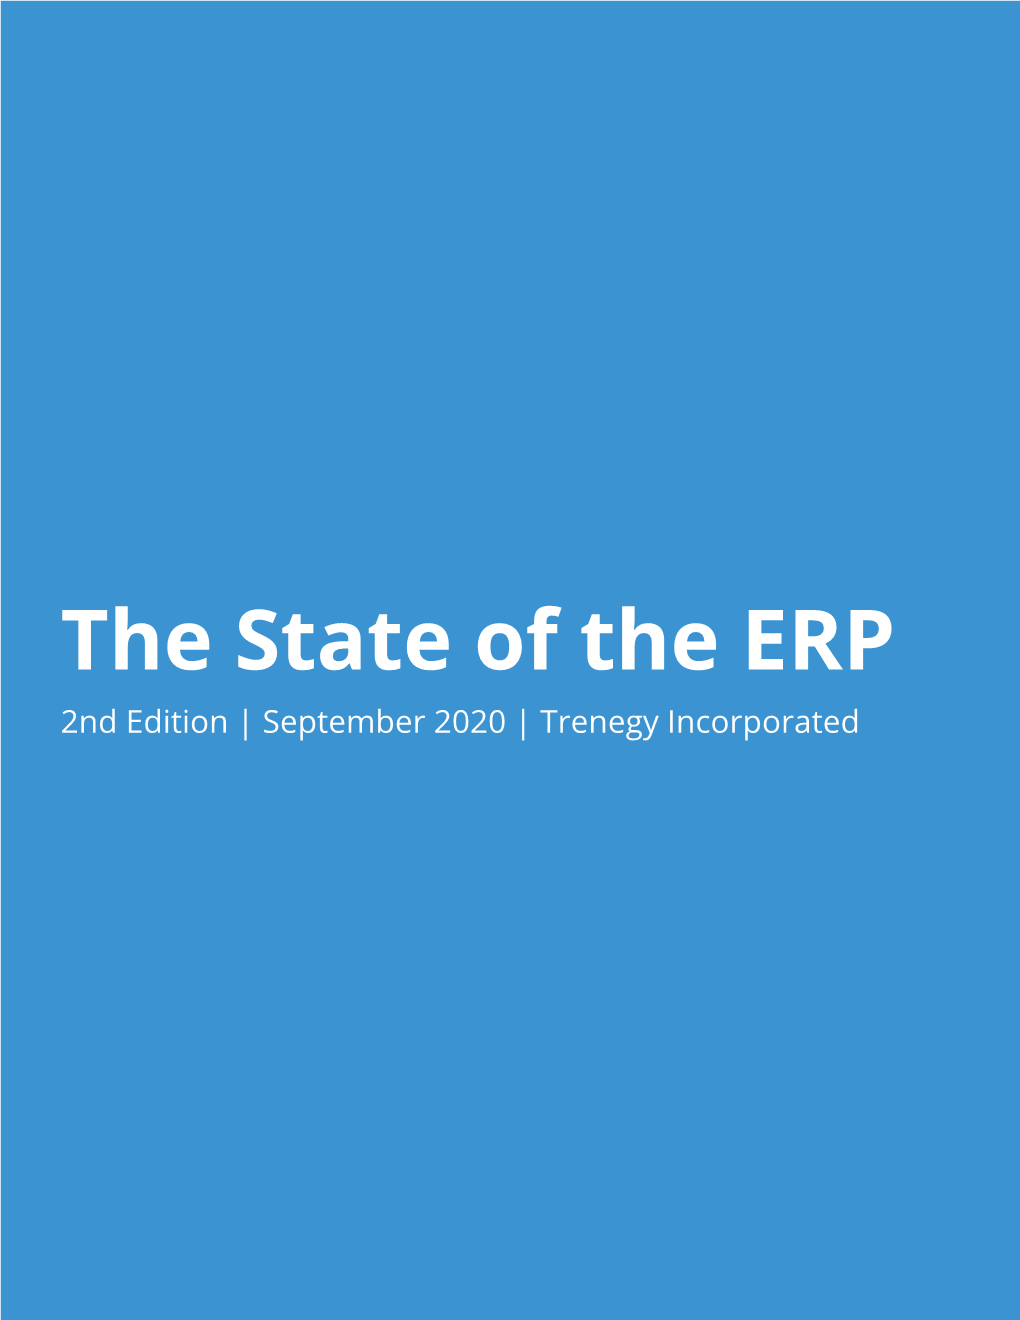 The State of the ERP 2Nd Edition | September 2020 | Trenegy Incorporated the Modern ERP